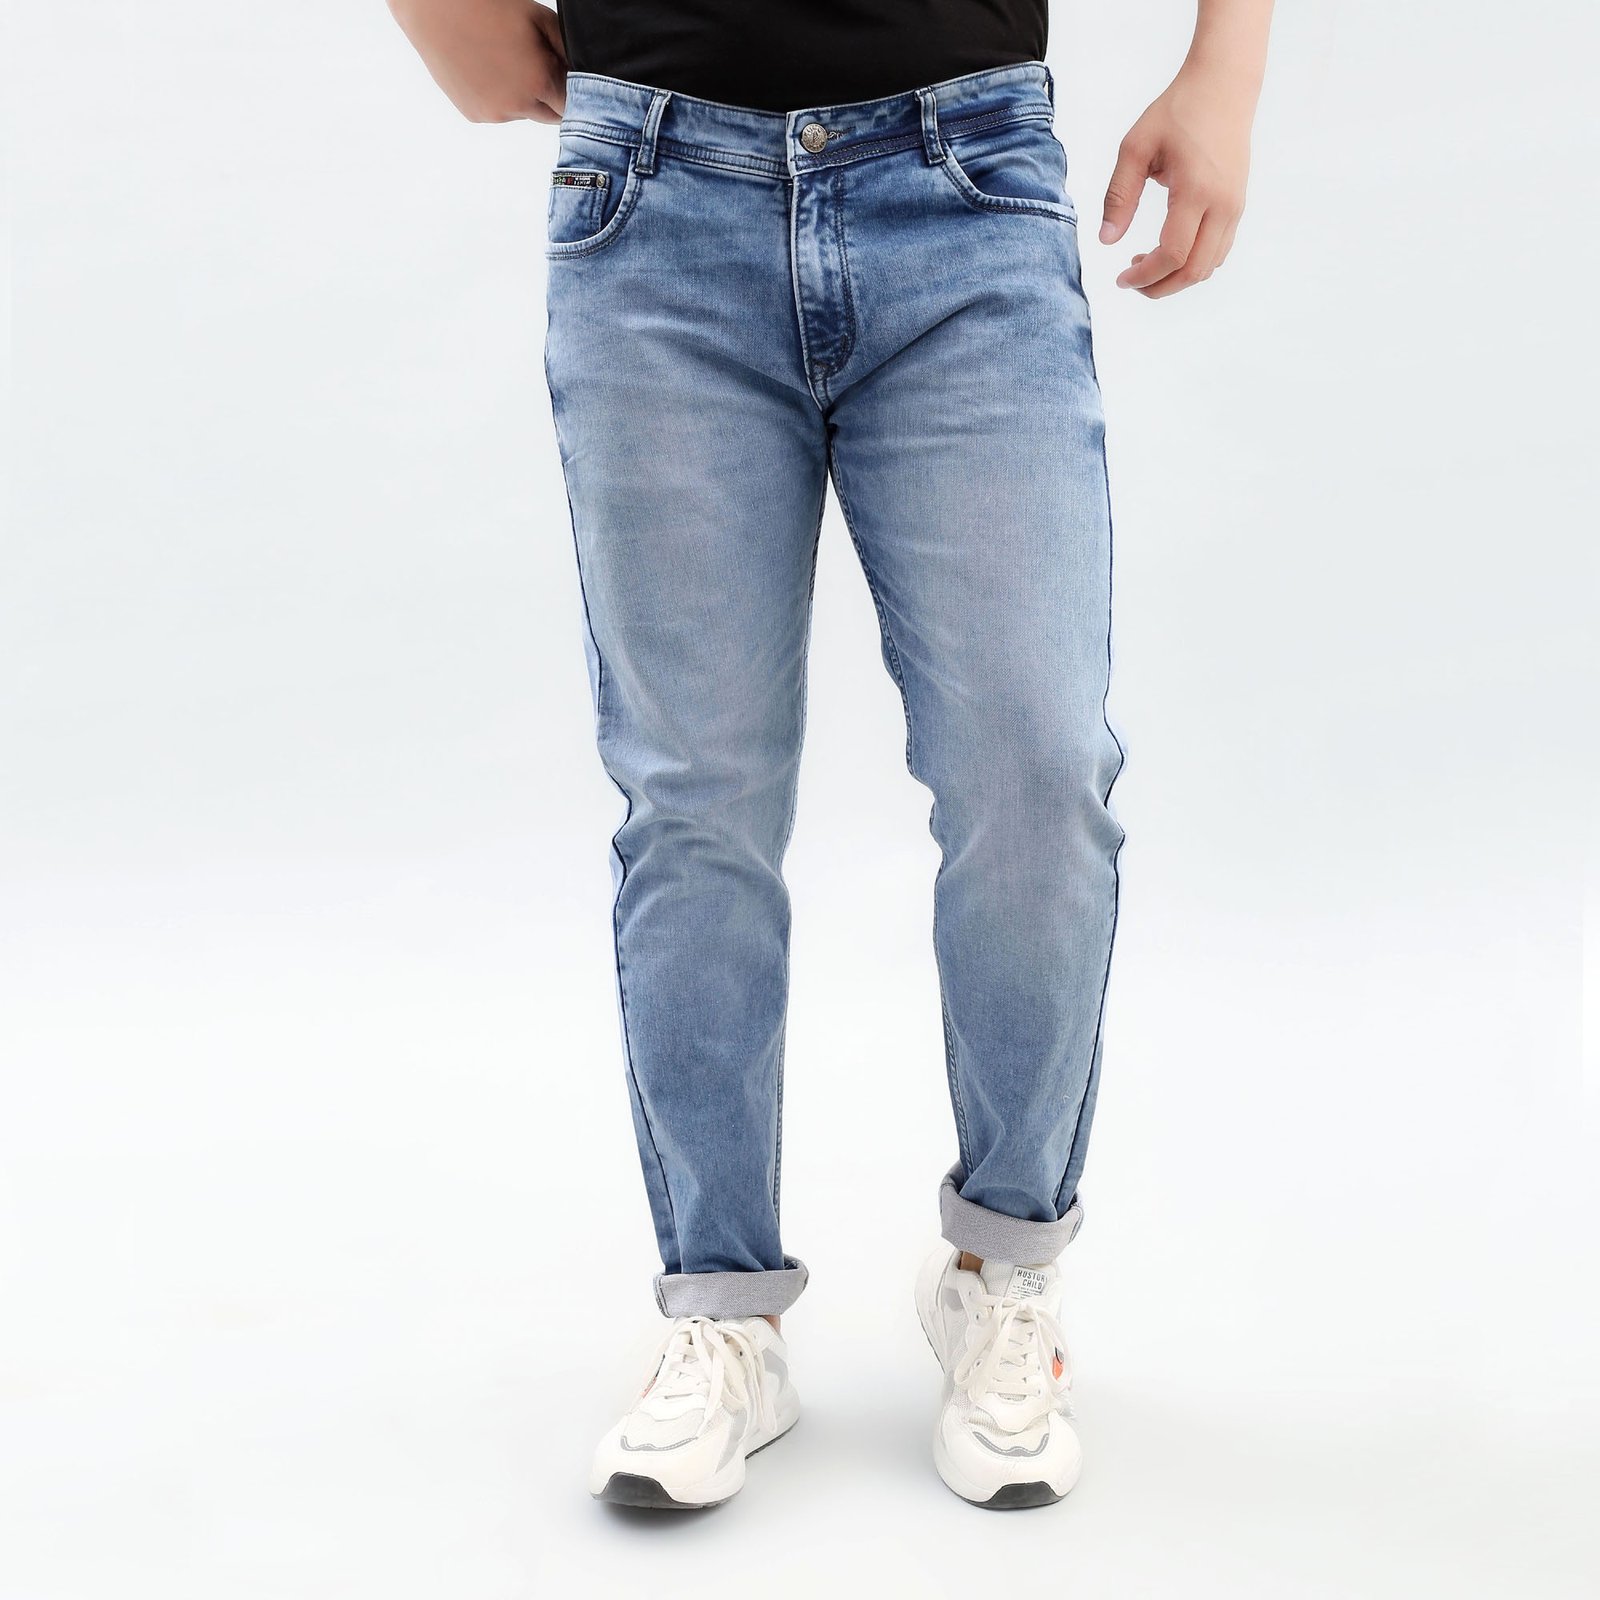 Doxy Clothing | Glenn Smith Ice Blue Color | Regular Fit Men's Jeans